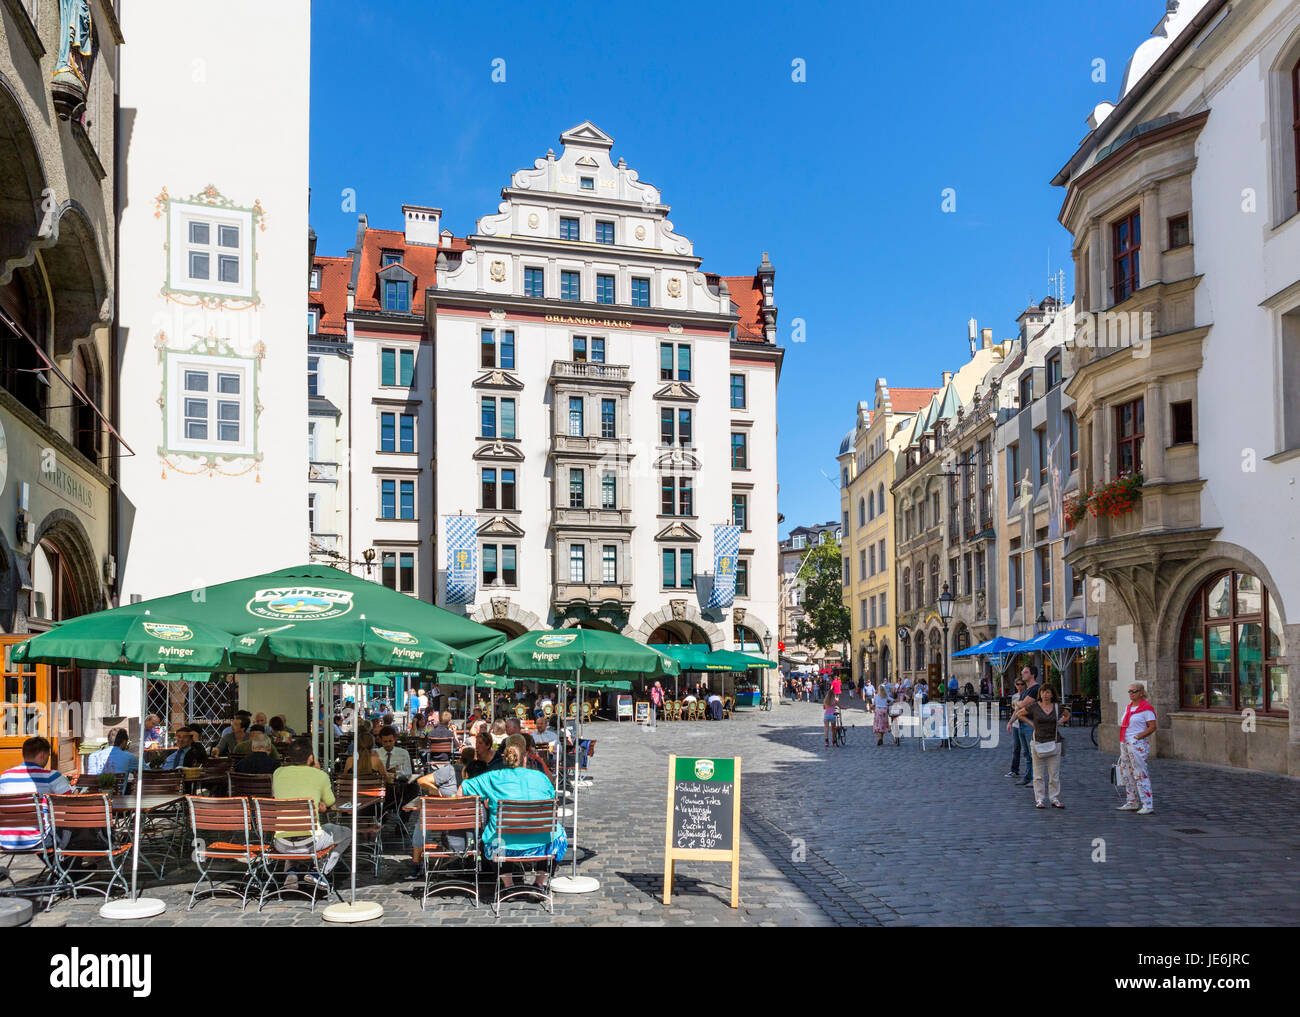 Beer halls High Resolution Stock Photography and Images - Alamy